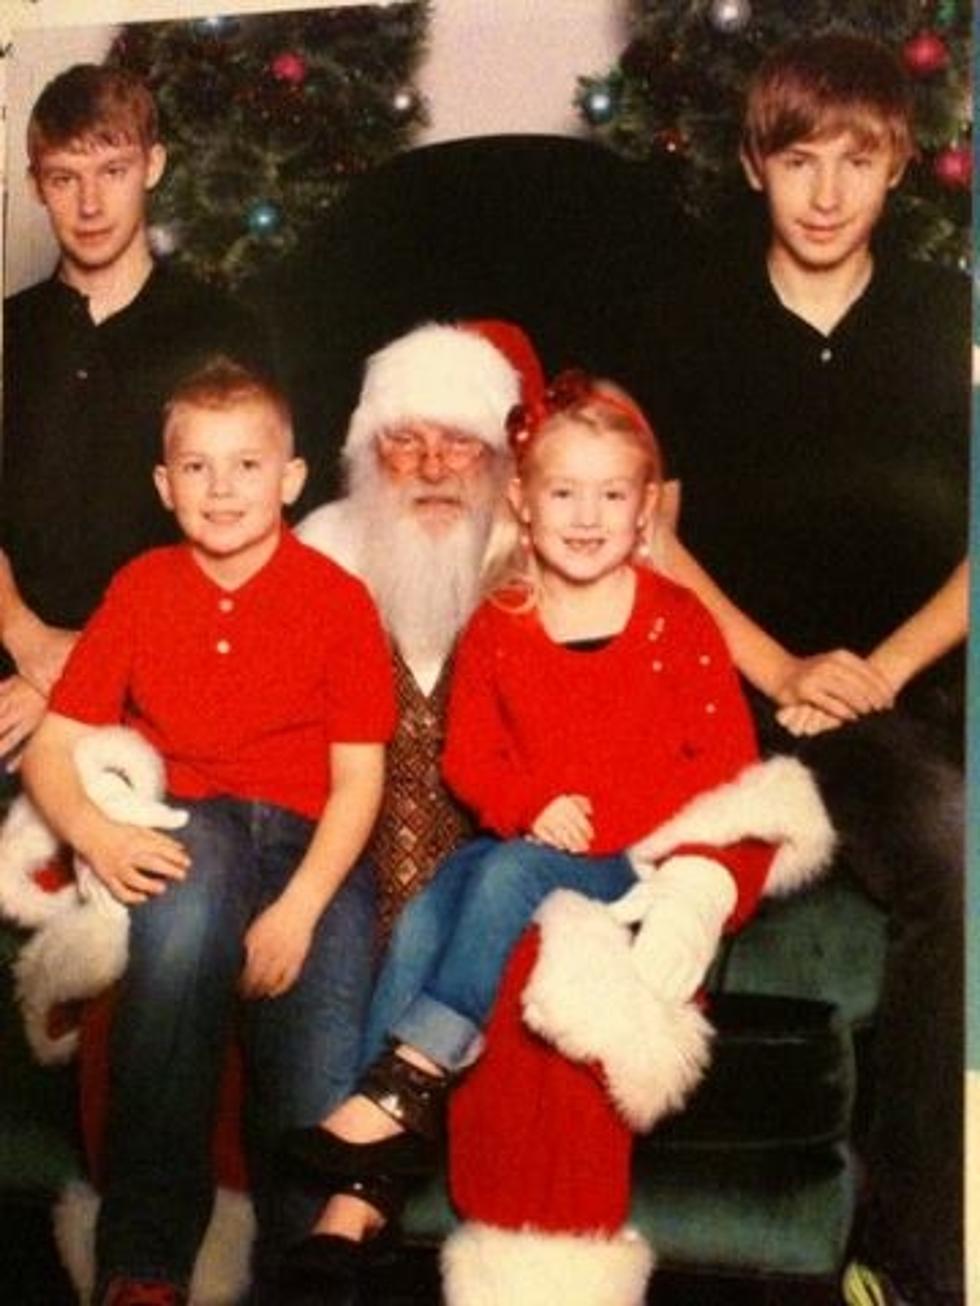 When Are You Too Old To Get Your Picture Taken With Santa?